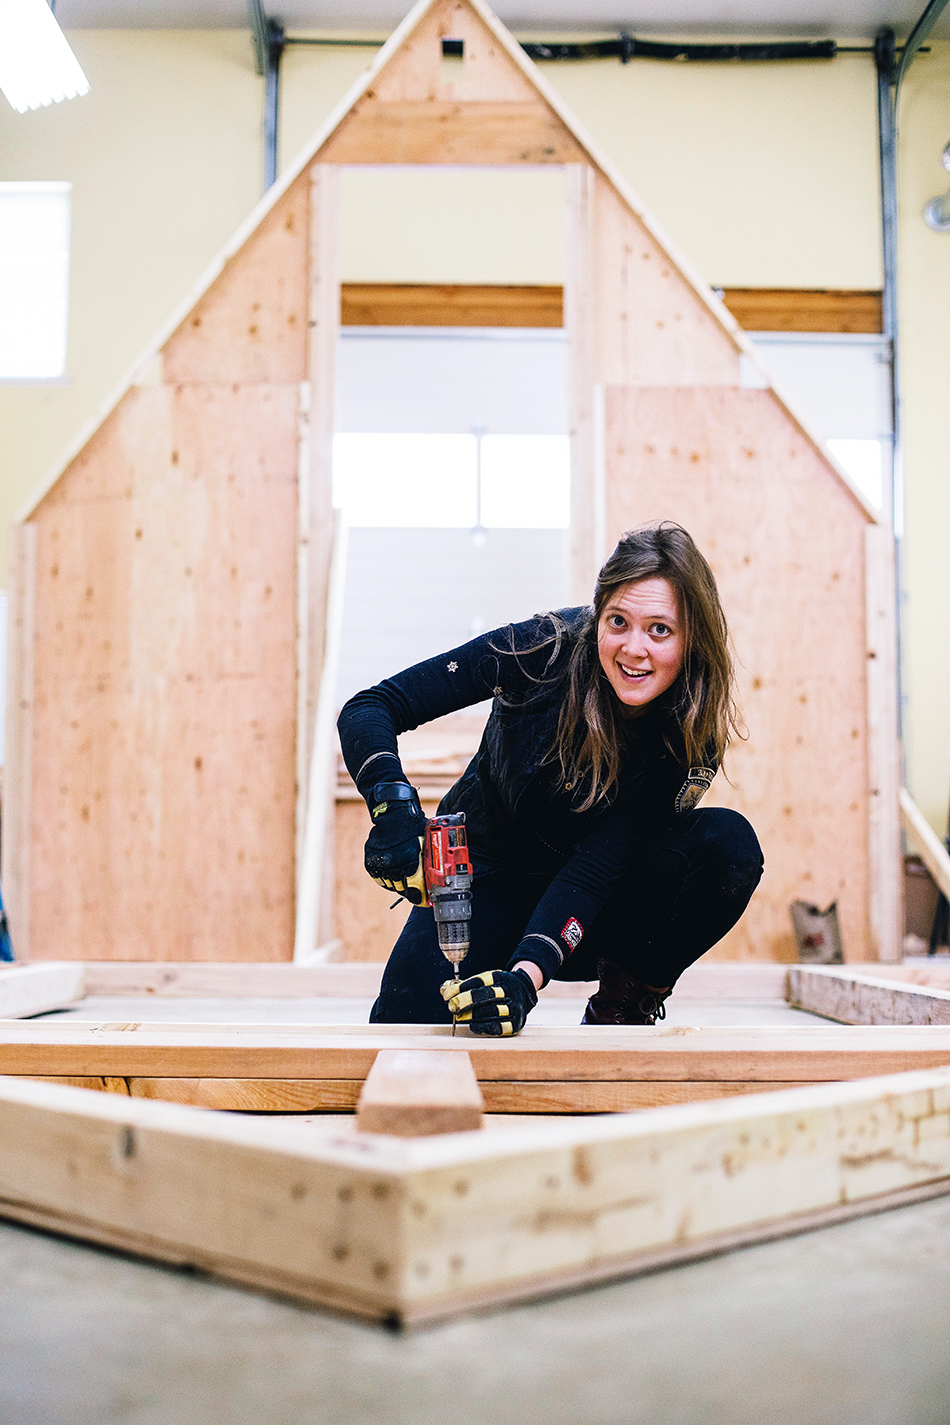 Why I Chose to Build a Tiny House at Age 26 - by Kate of A Lighter Earth on eco club